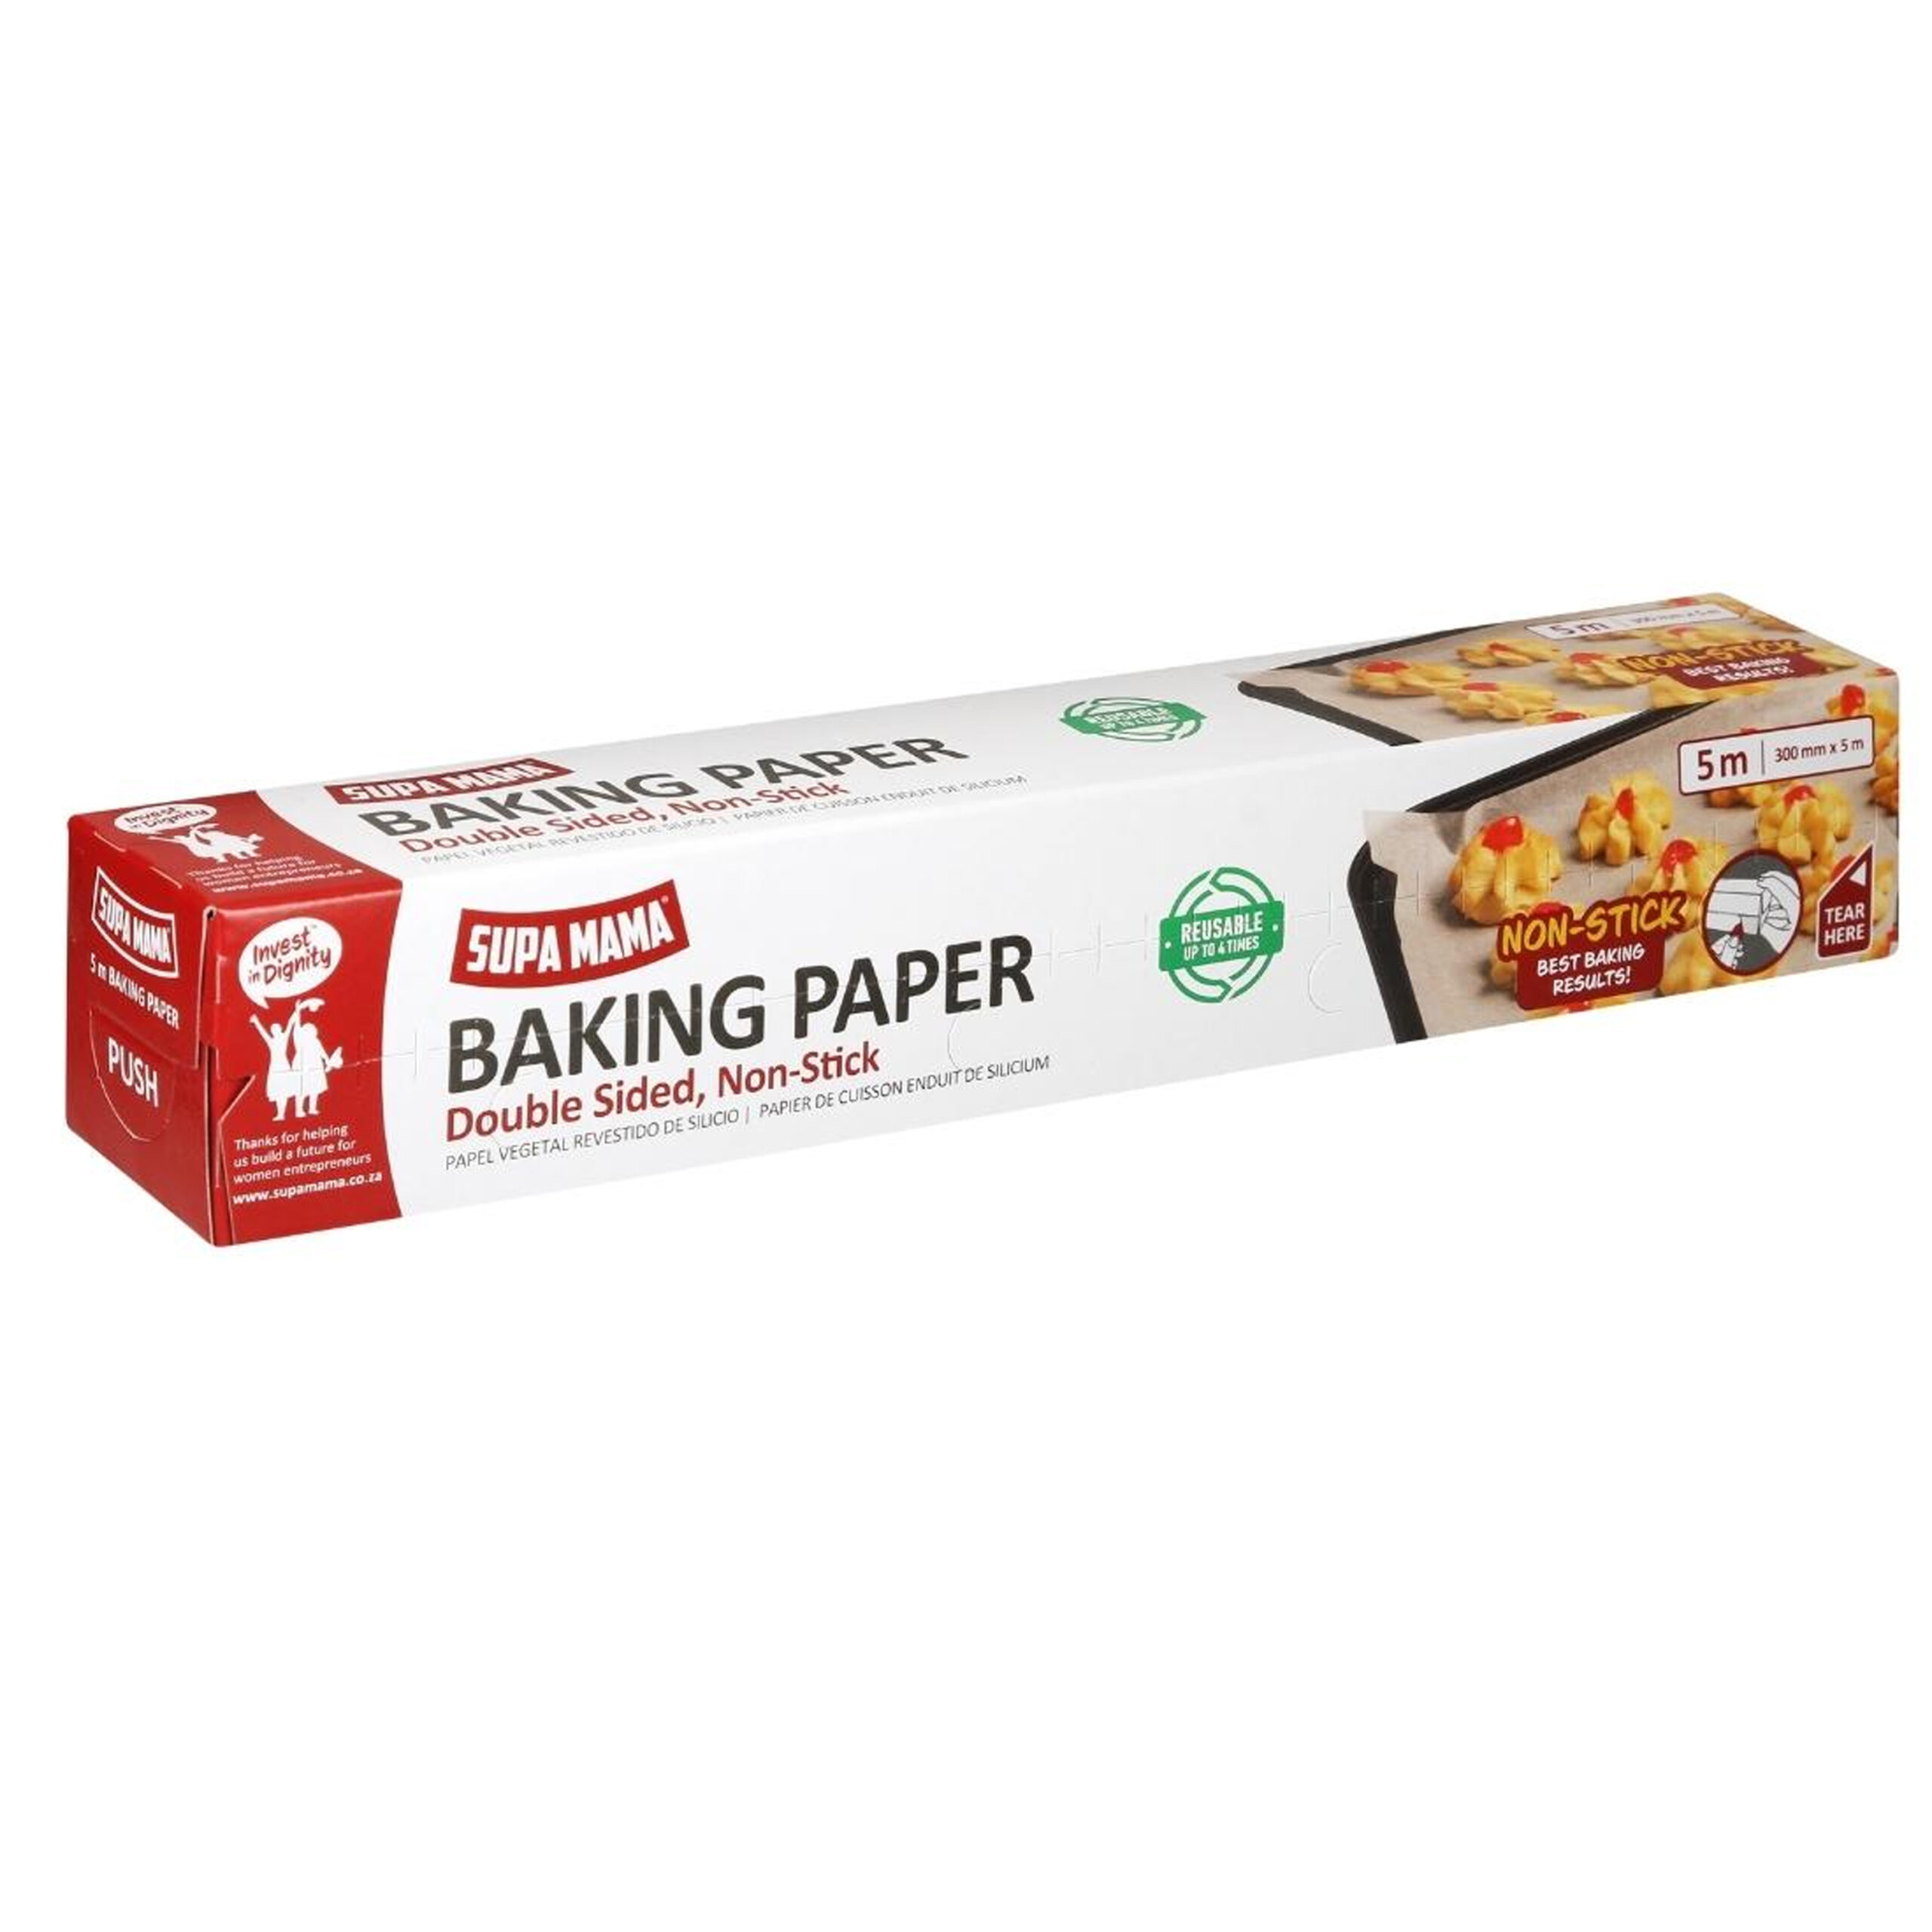 SUPA MAMA
BAKING PAPER
DOUBLE SIDED
NON-STICK 300mm
x 5mt